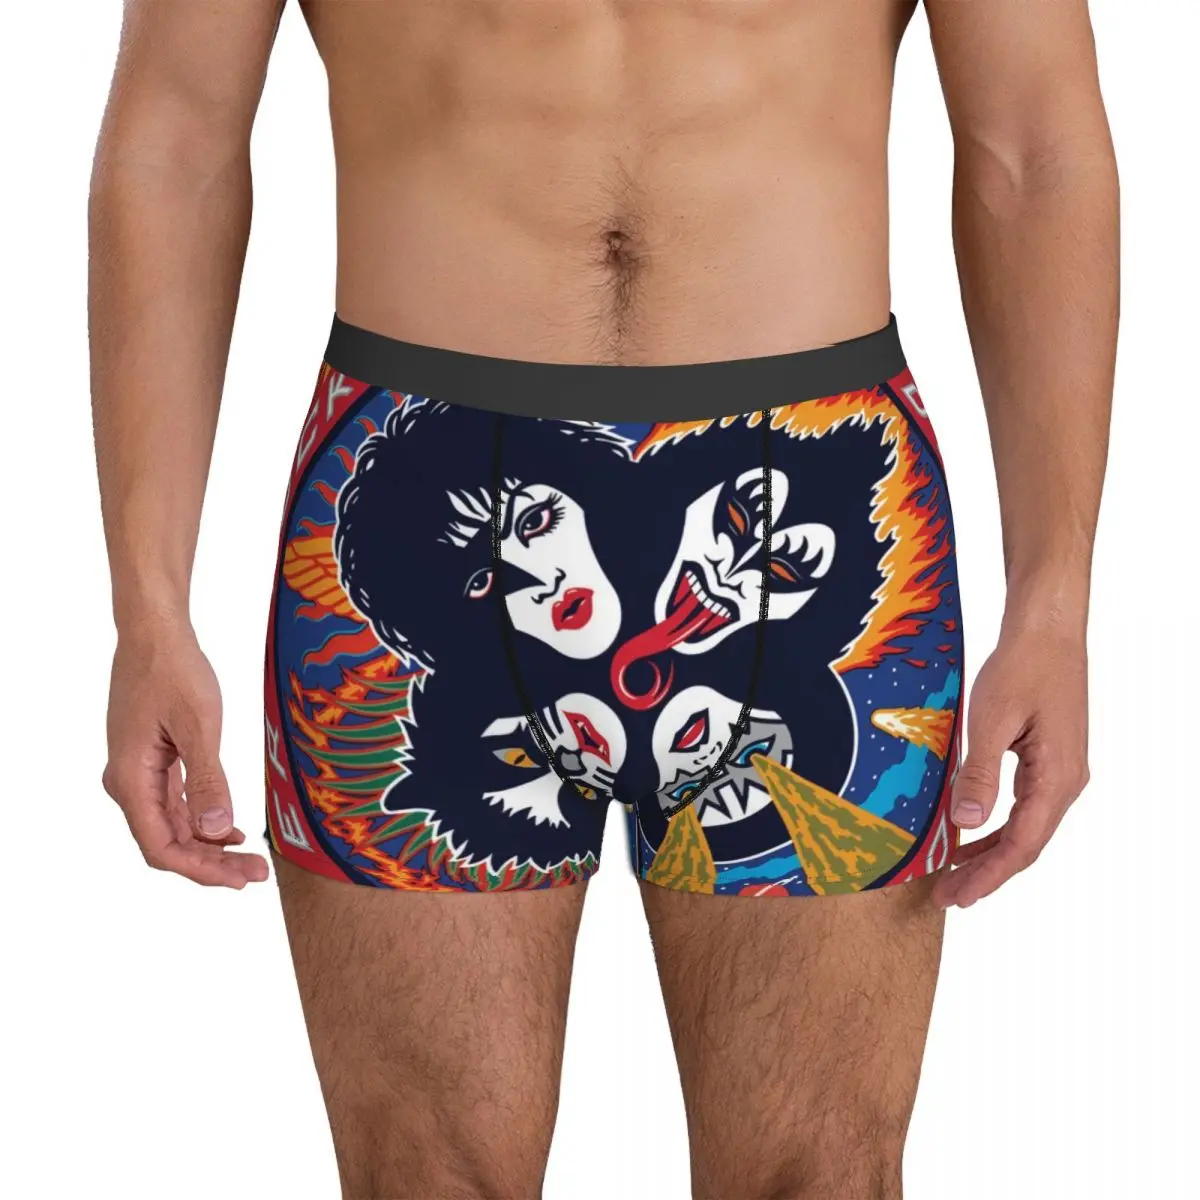 Kiss Band Underwear Kiss Band Fans Pouch Trenky Boxer Shorts Printing  Shorts Briefs Comfortable Man Underpants Plus Size 2XL